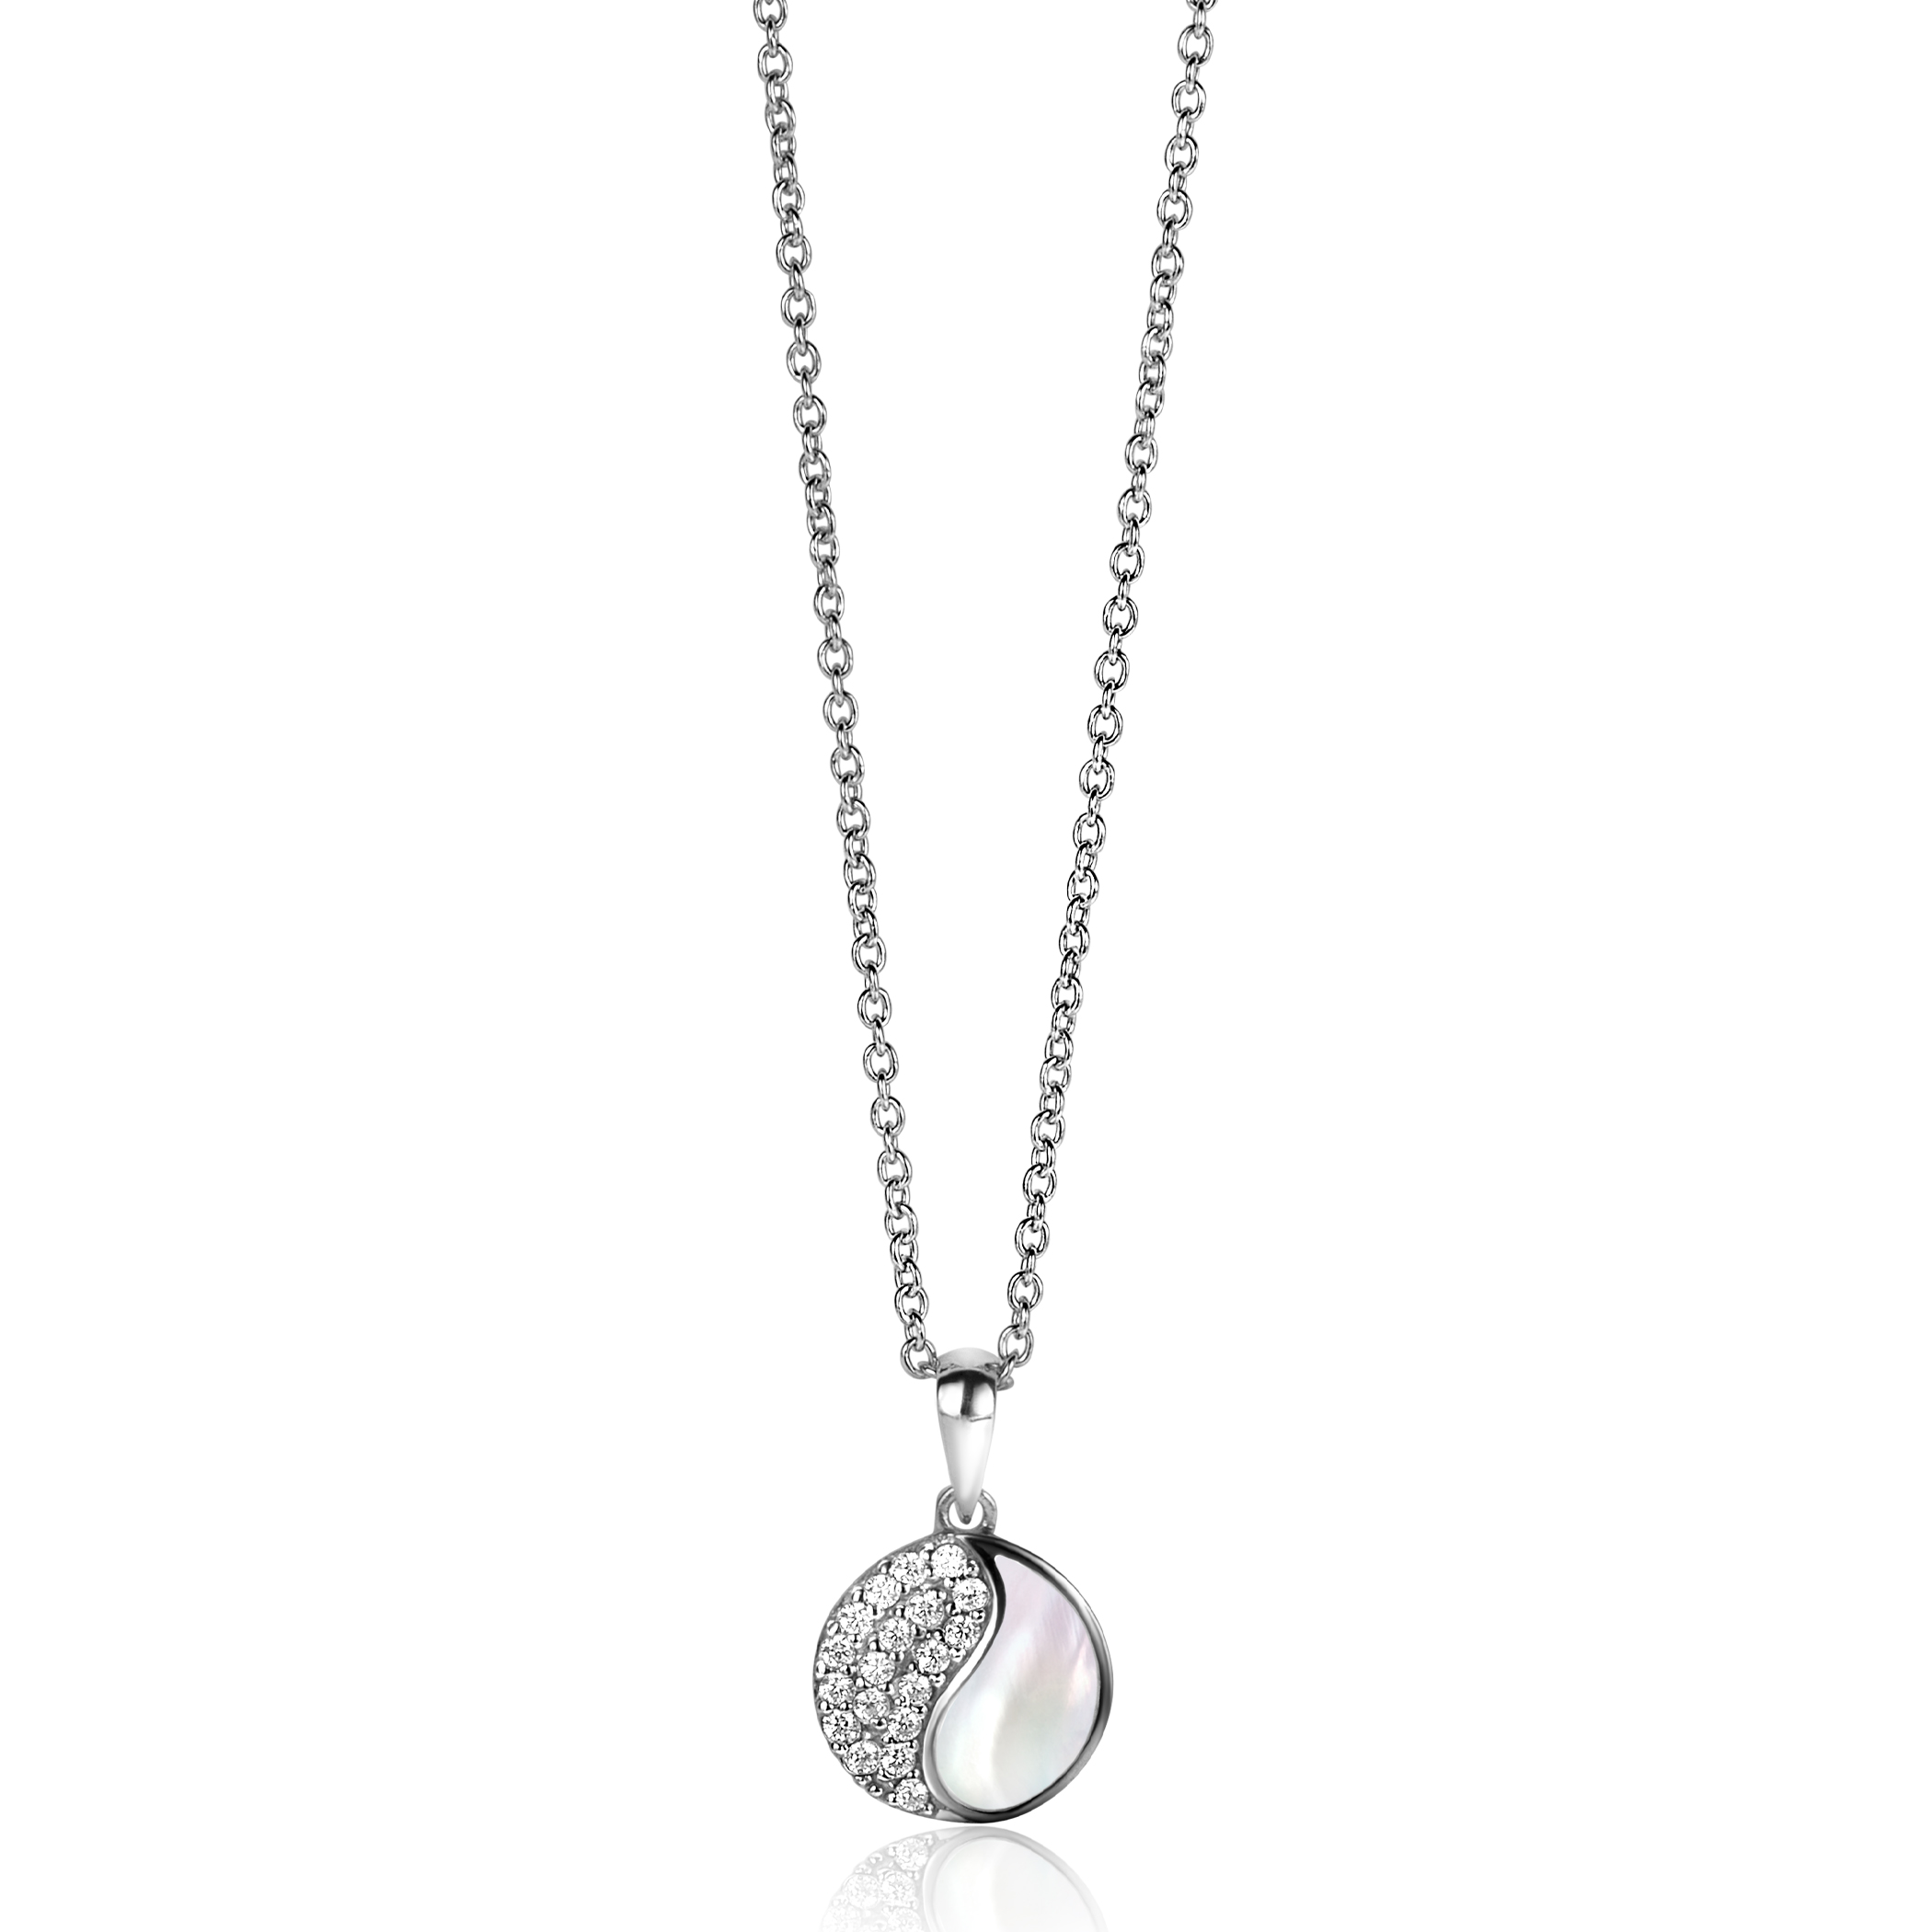 18mm ZINZI Sterling Silver Yin Yang Pendant Round Set with Mother-of-Pearl and White Zirconias ZIH2423 (excl. necklace)